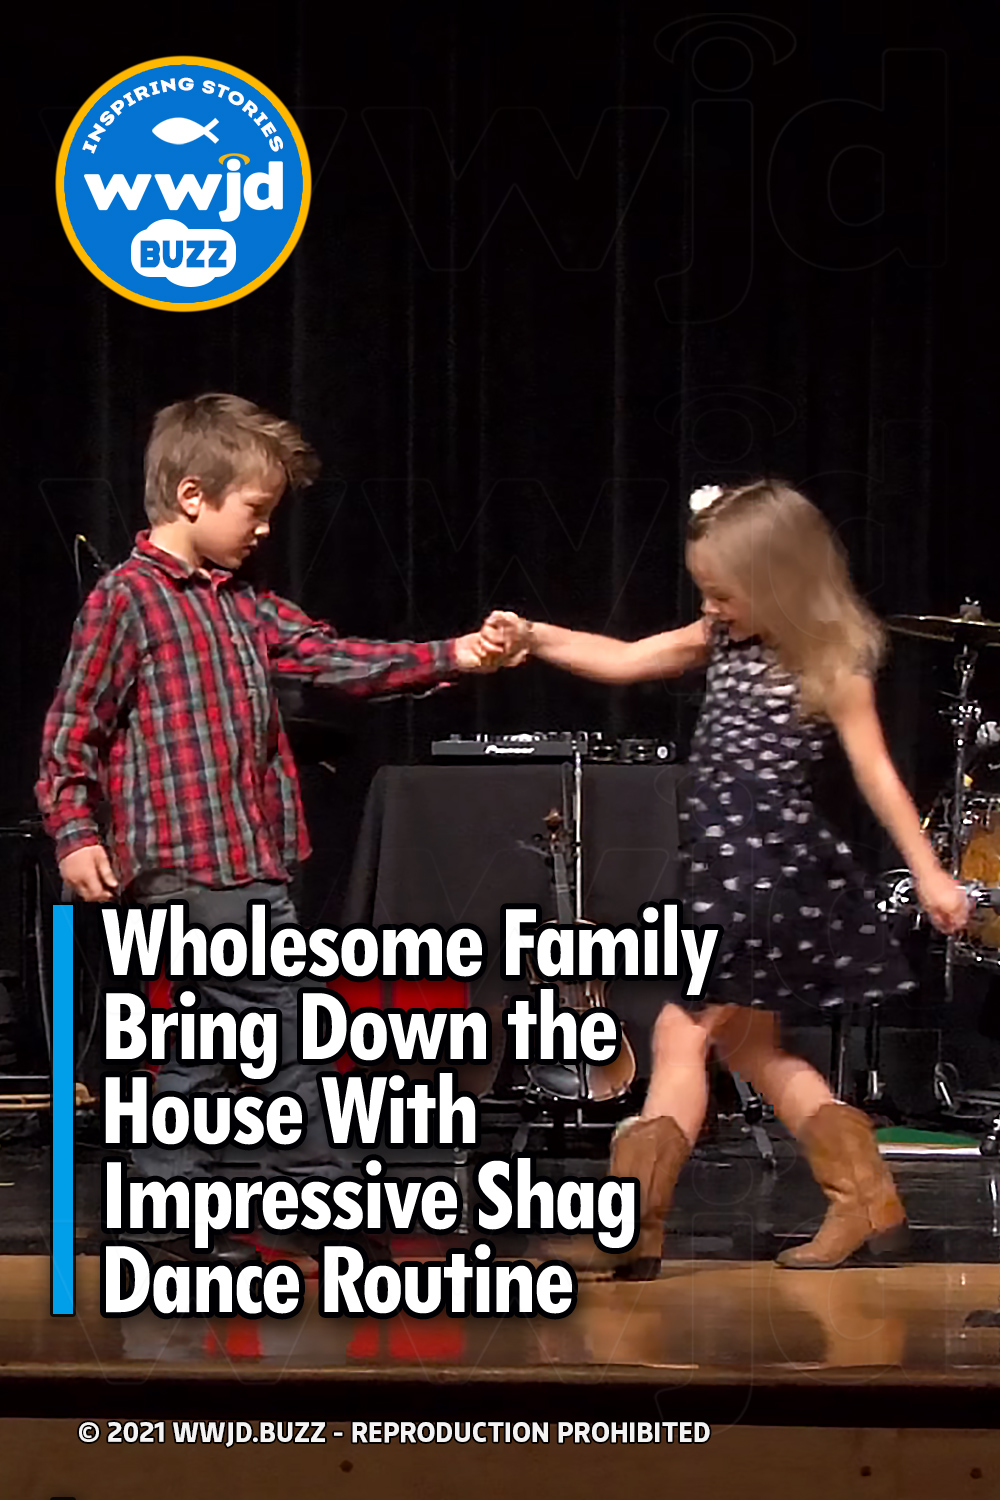 Wholesome Family Bring Down the House With Impressive Shag Dance Routine